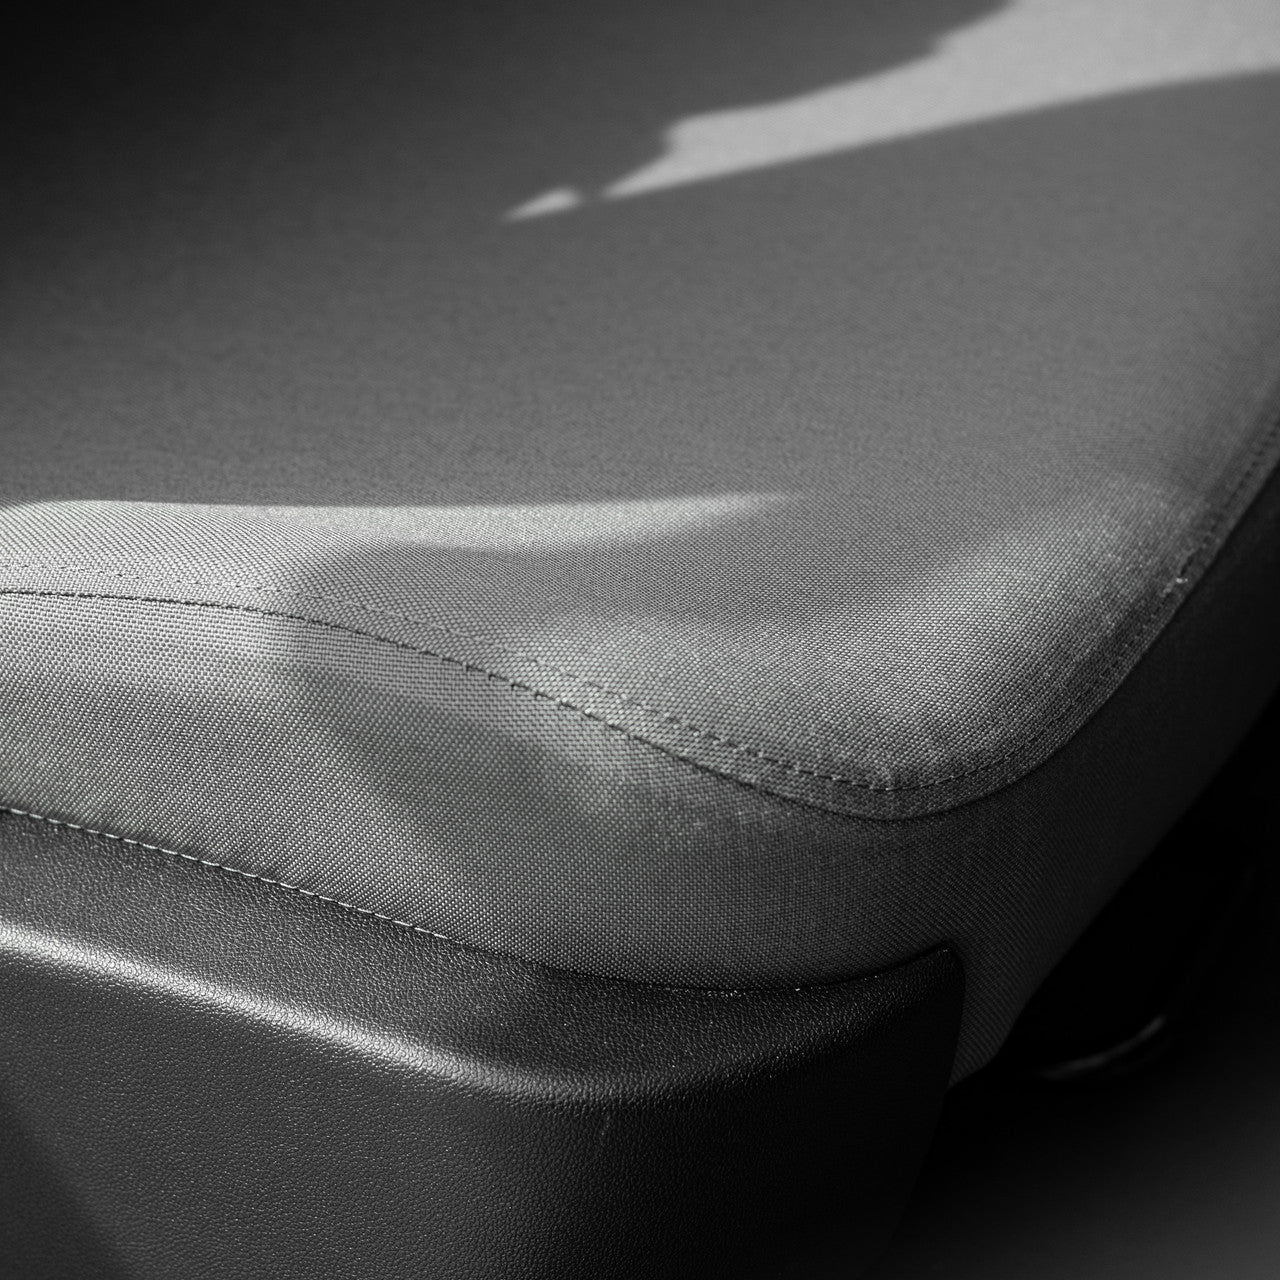 Seat bottom detail on the Seat Covers for the Chevy Colorado / GMC Canyon